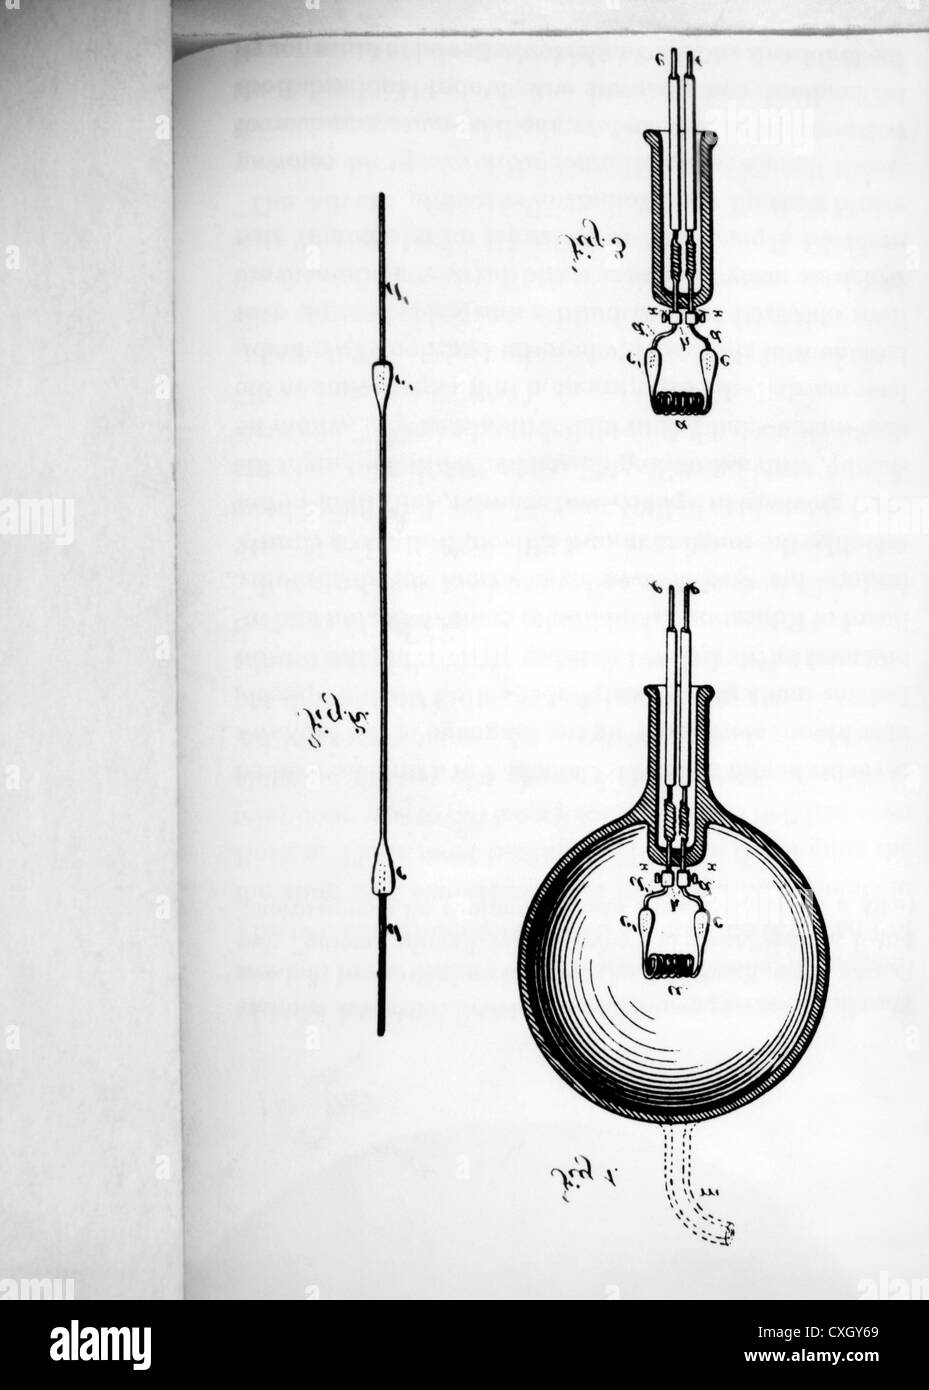 Print of Patent Application For Incandescent Carbon Filament Lamp-Thomas A. Edison Stock Photo